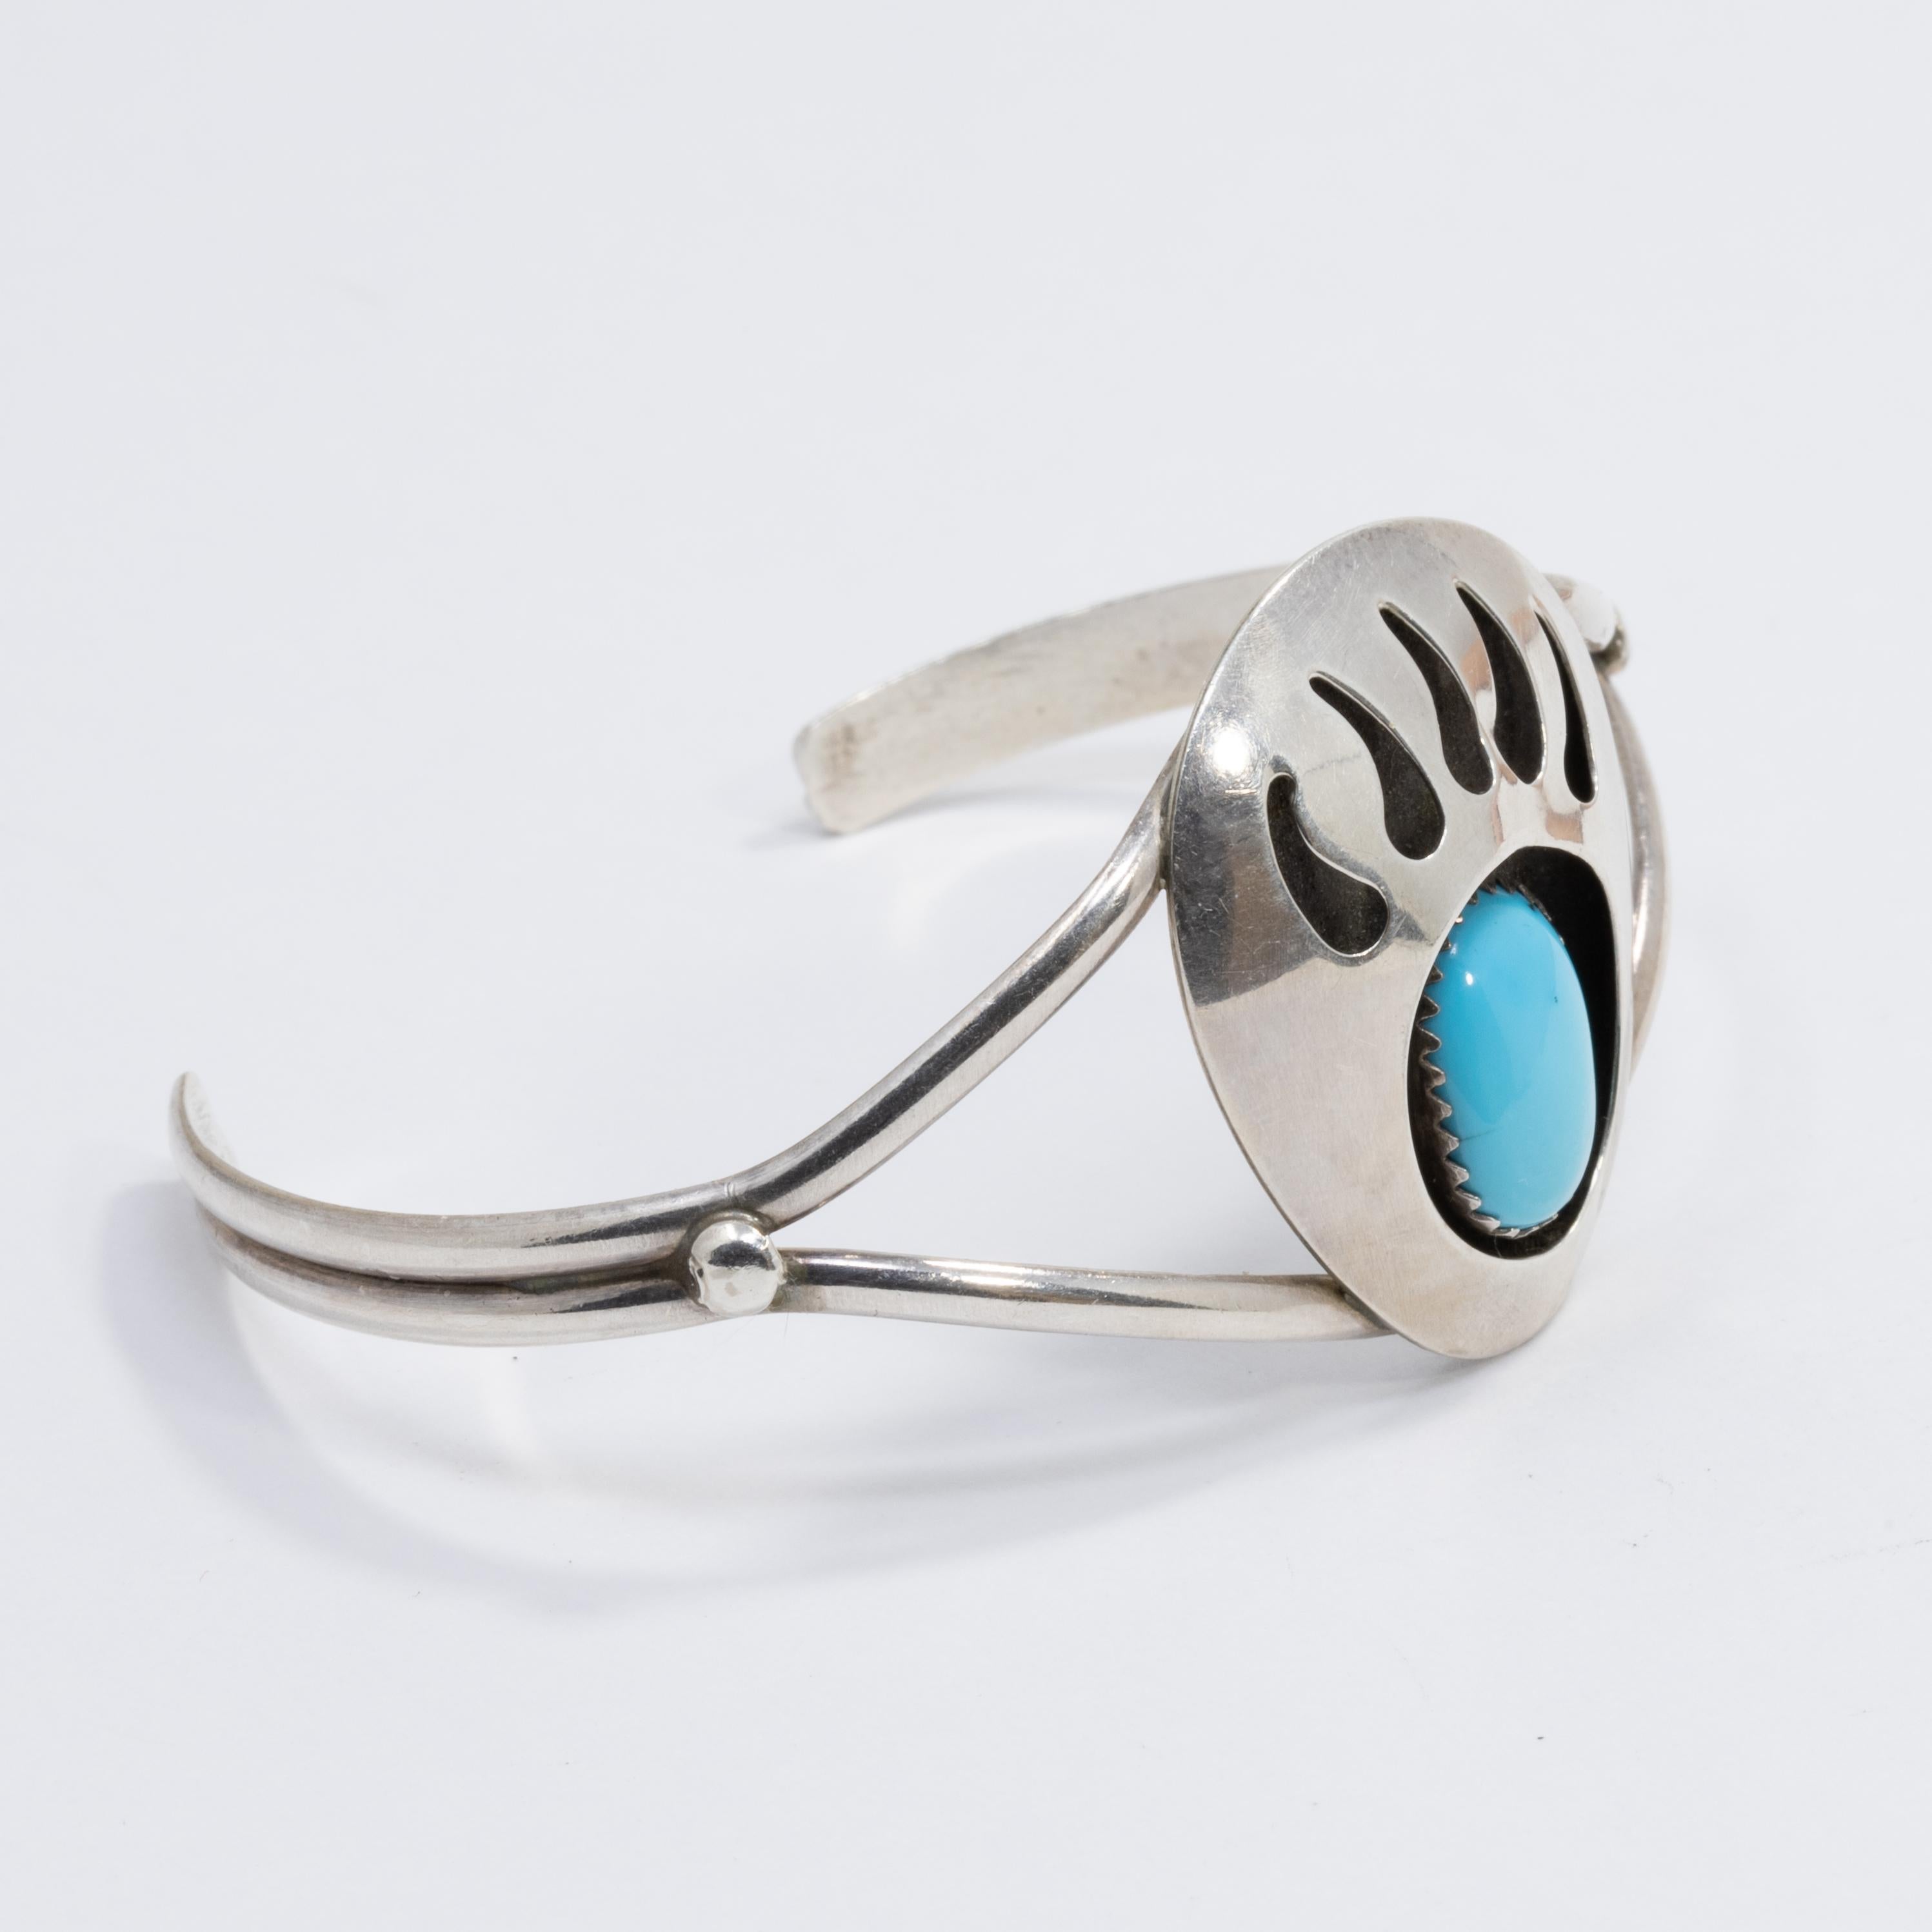 A vintage Native American bracelet! This elegant sterling silver cuff features a bear claw motif centerpiece accented with a single turquoise cabochon, which is set in a sawtooth bezel.

Inner diameter at widest part: 6 cm
Face height: 3.1 cm